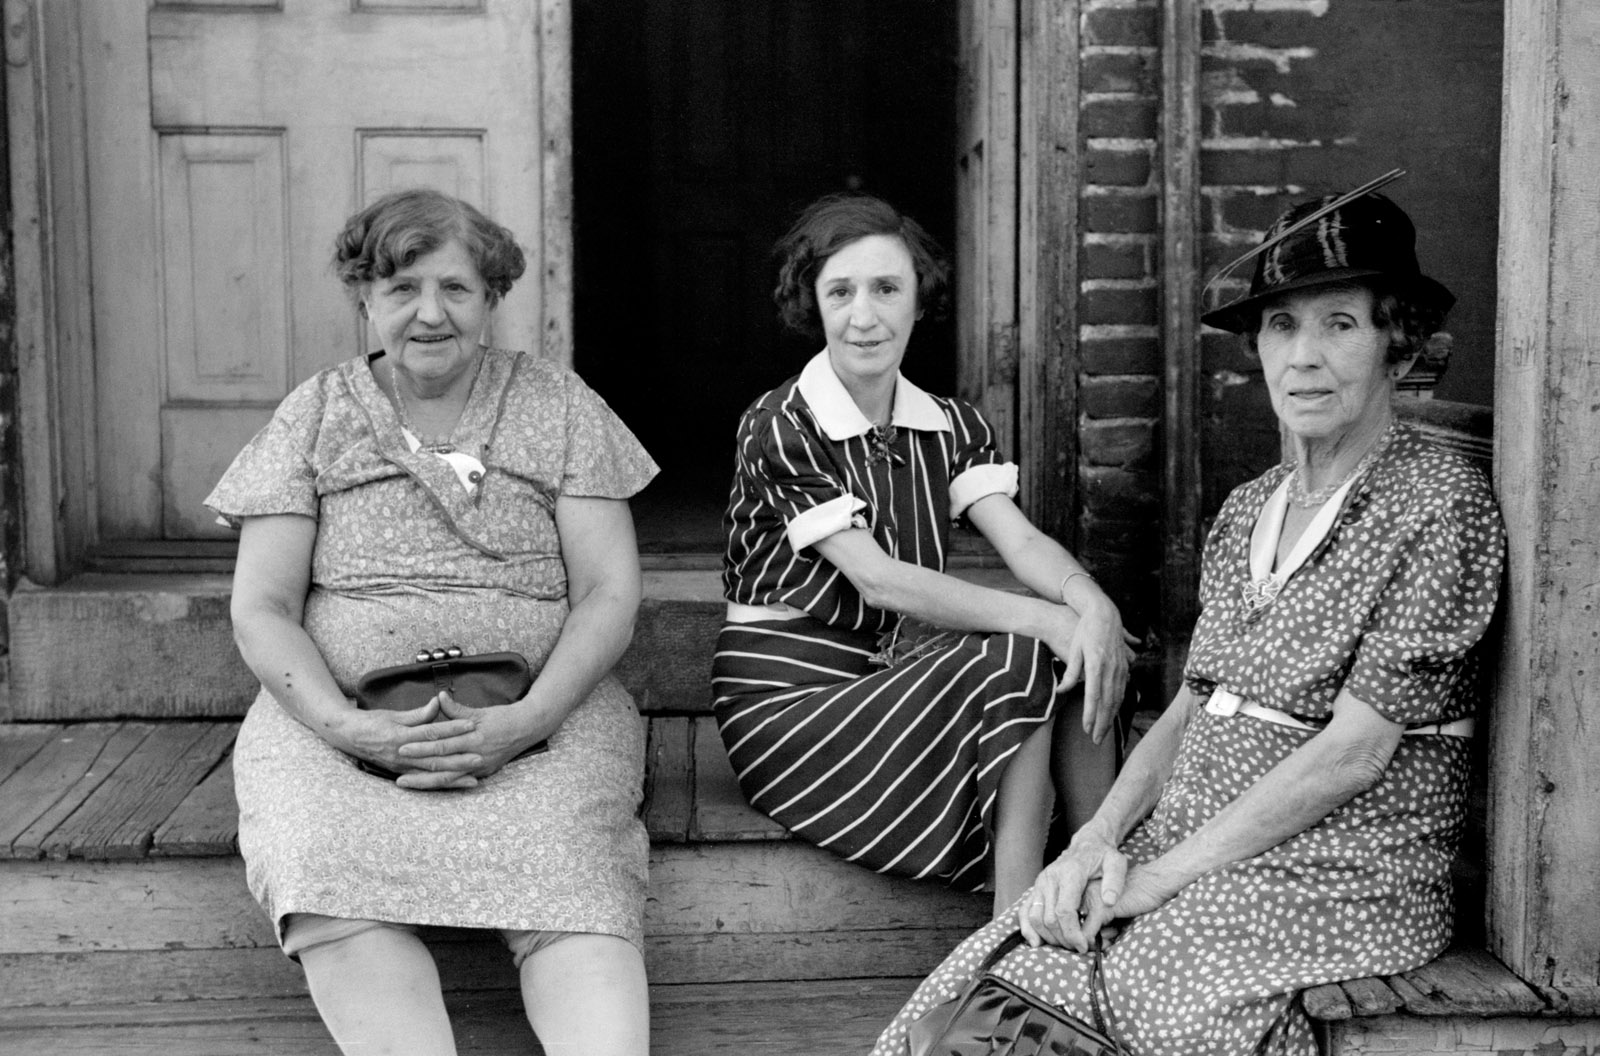 Ladies who live in a rooming house, St. Paul, Minnesota, September 1939